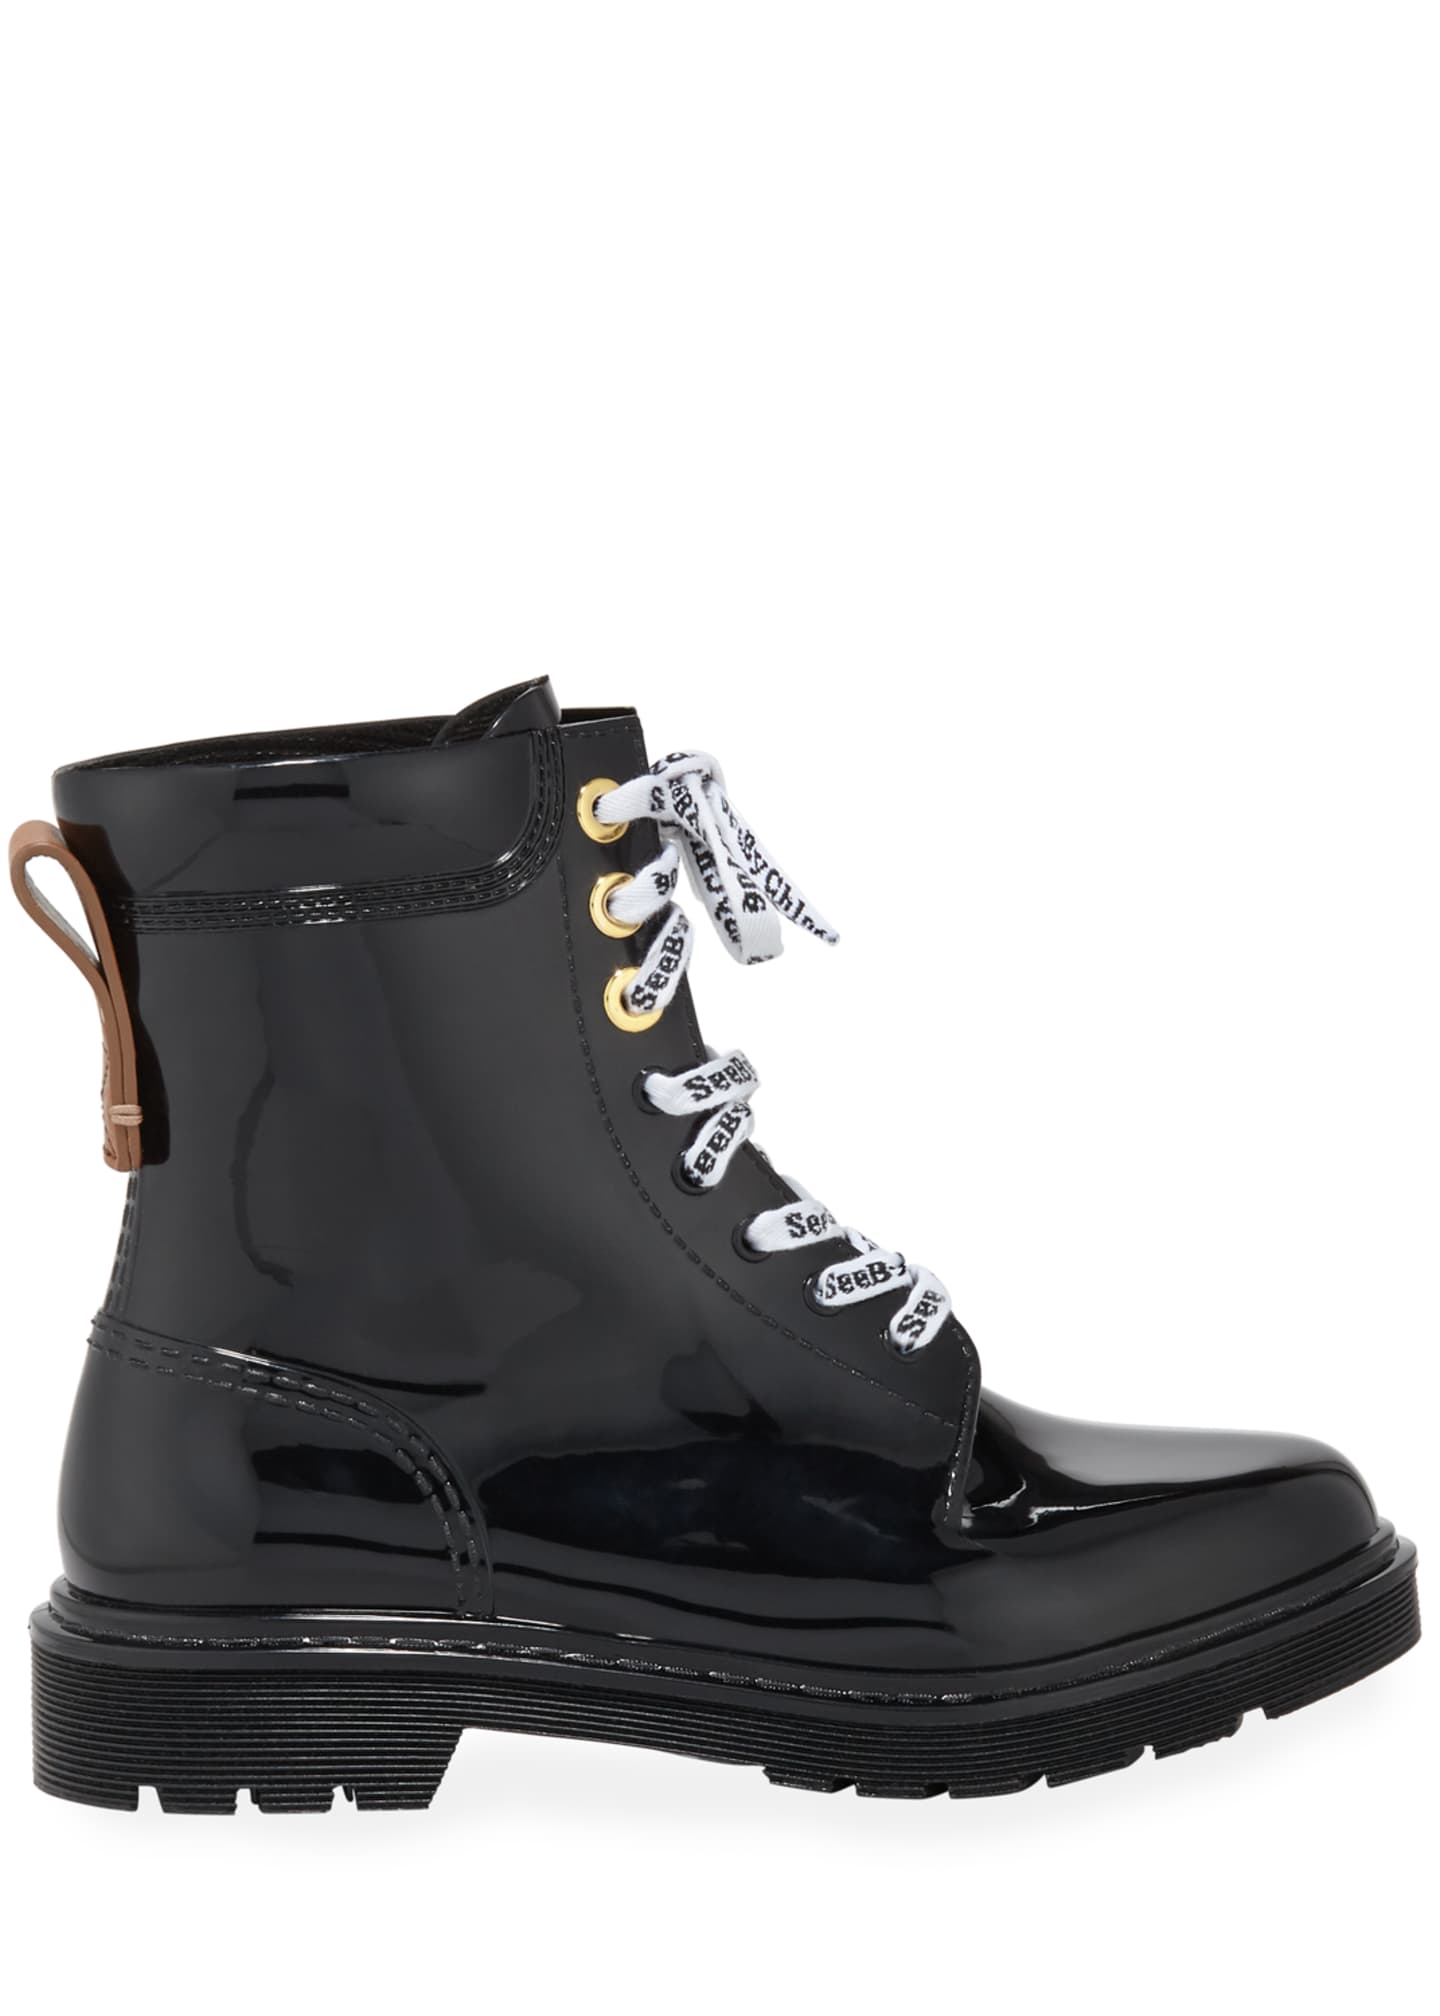 See by Chloe Rubber Lace-Up Rain Boots - Bergdorf Goodman